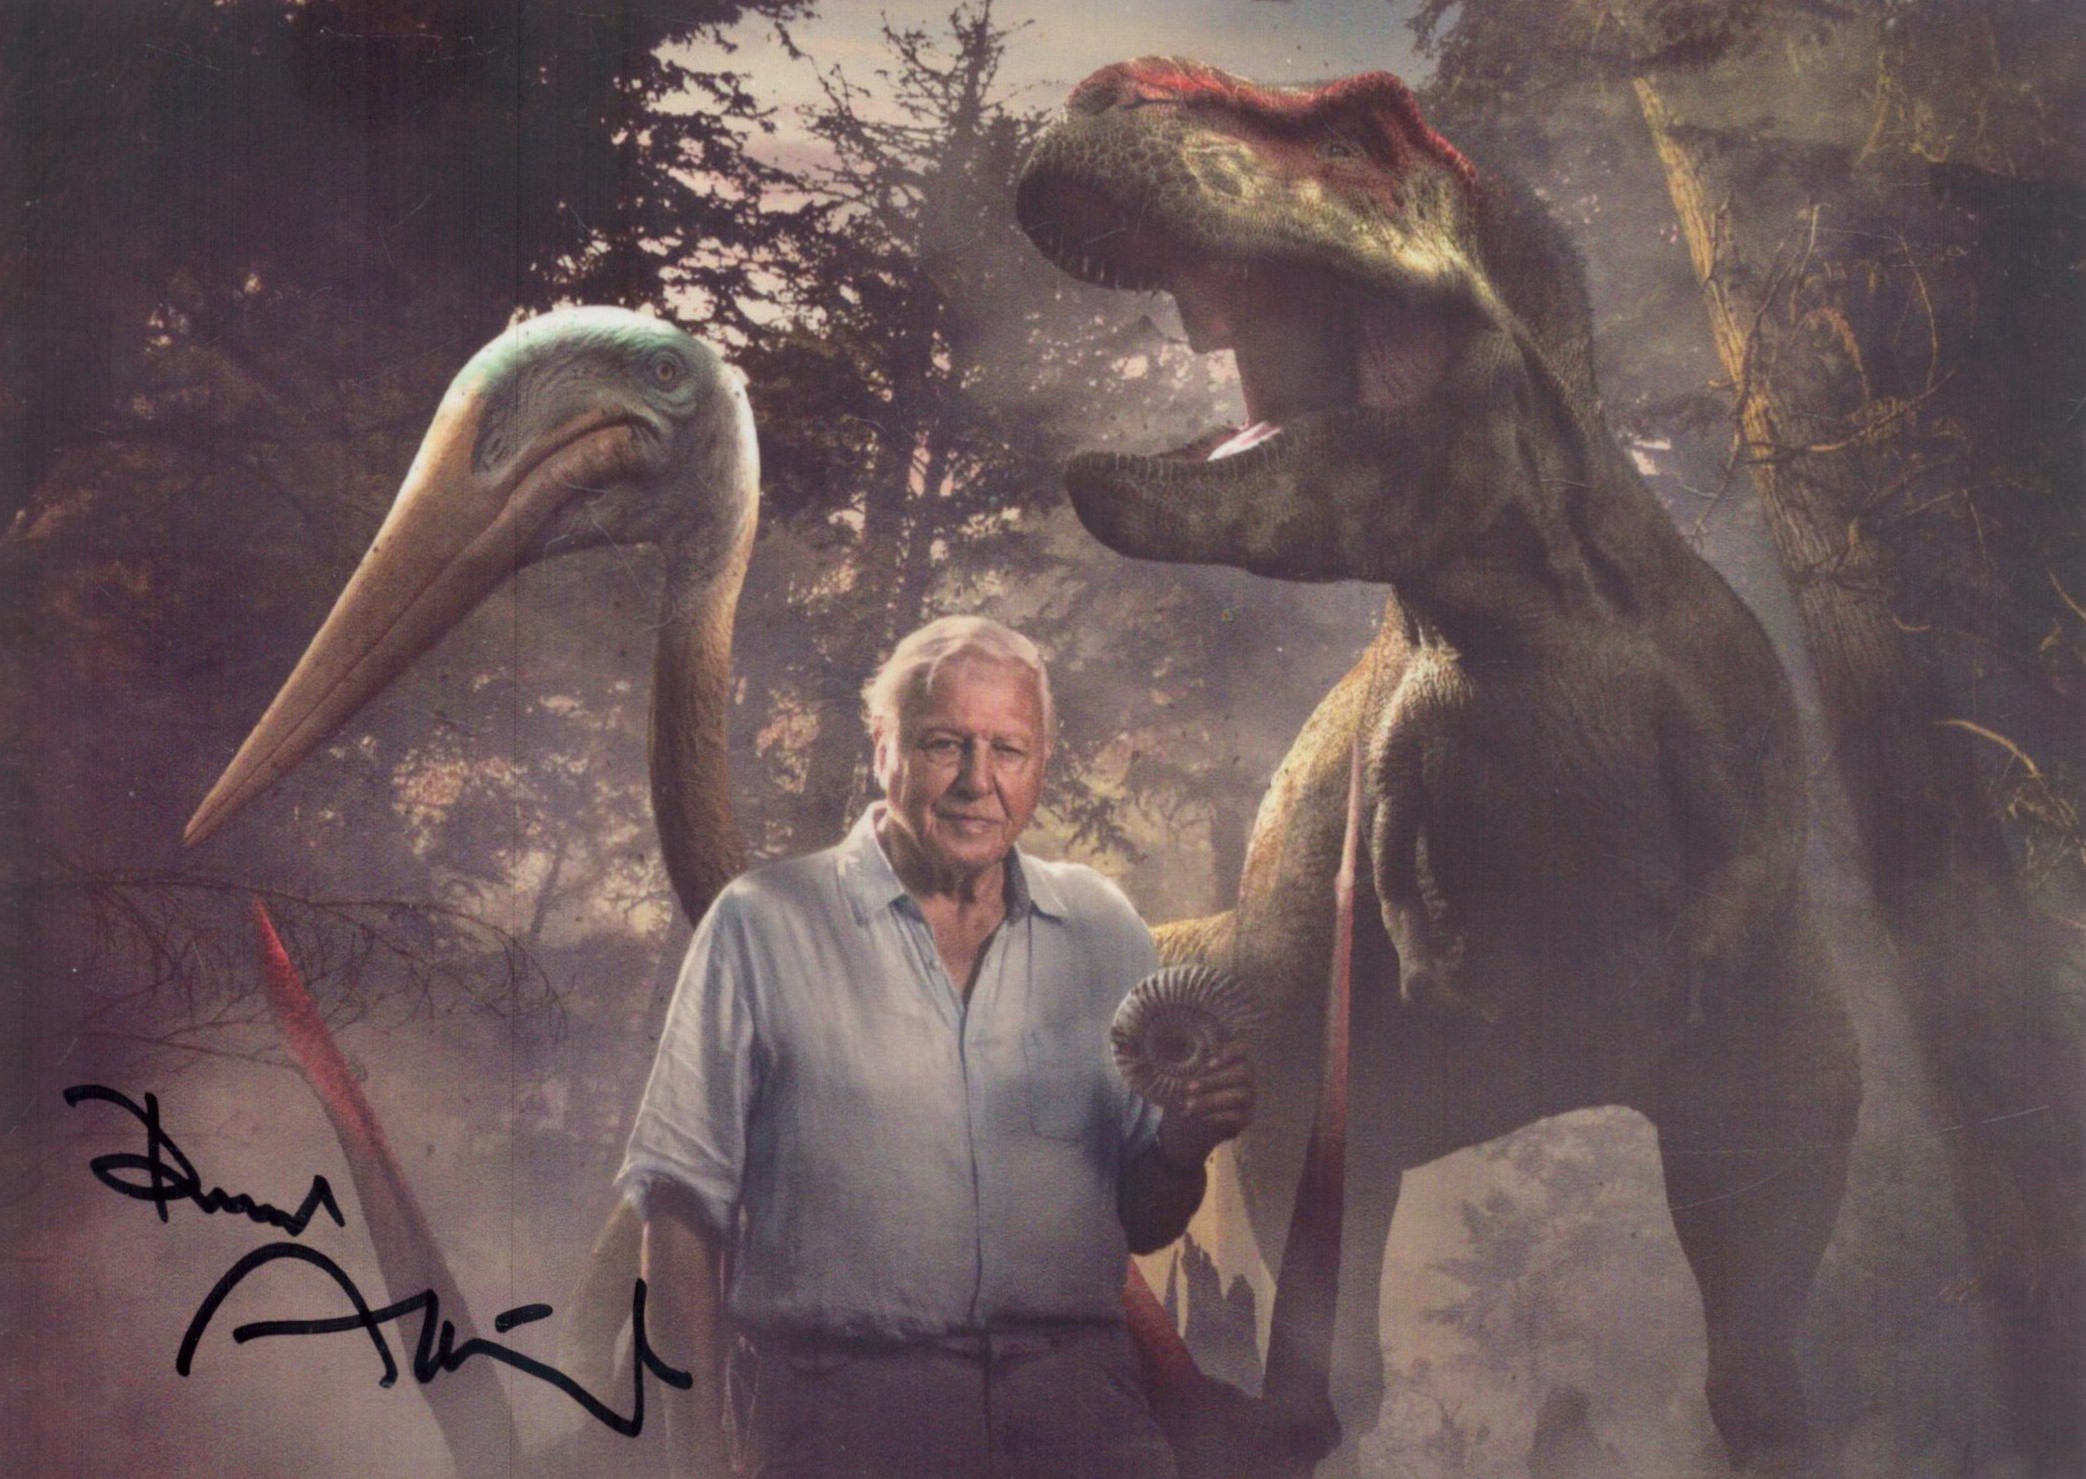 David Attenborough signed 7x5 inch colour photo. Good Condition. All autographs come with a